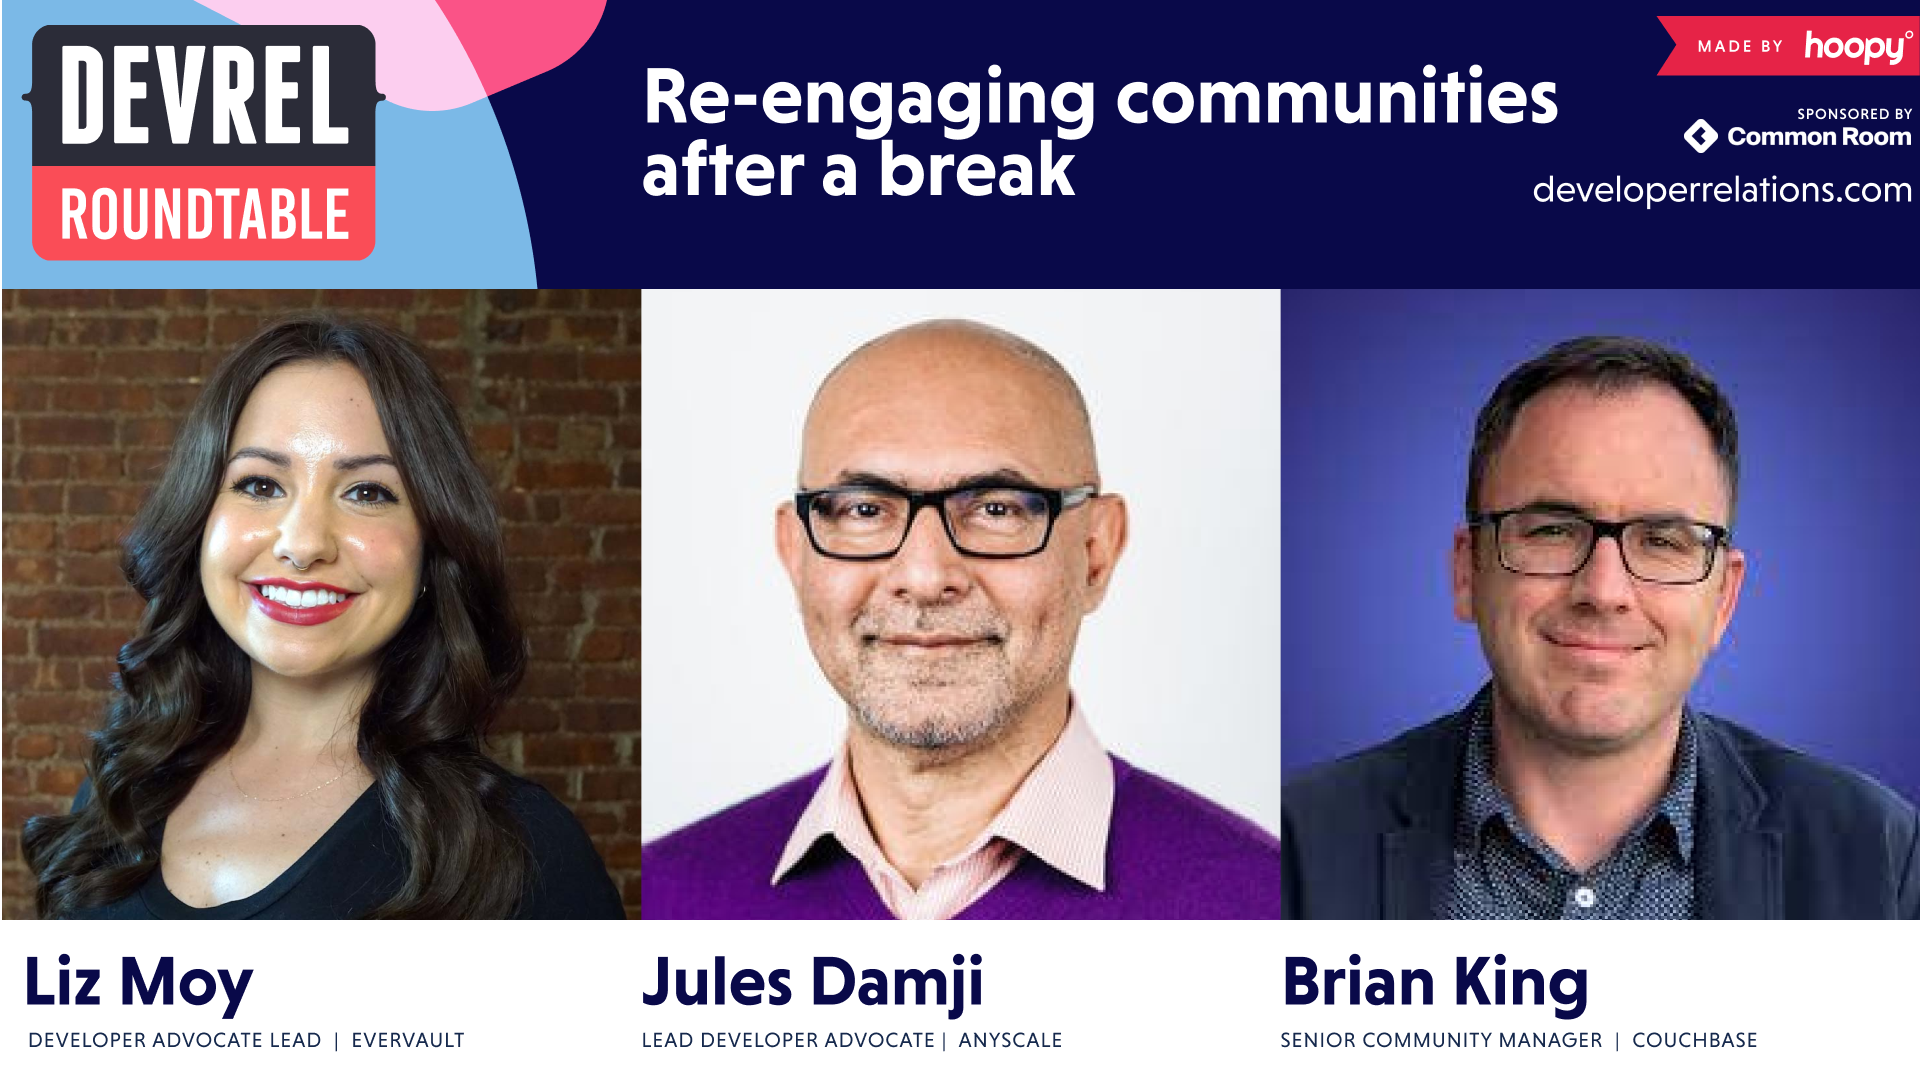 Re-engaging communities after a break